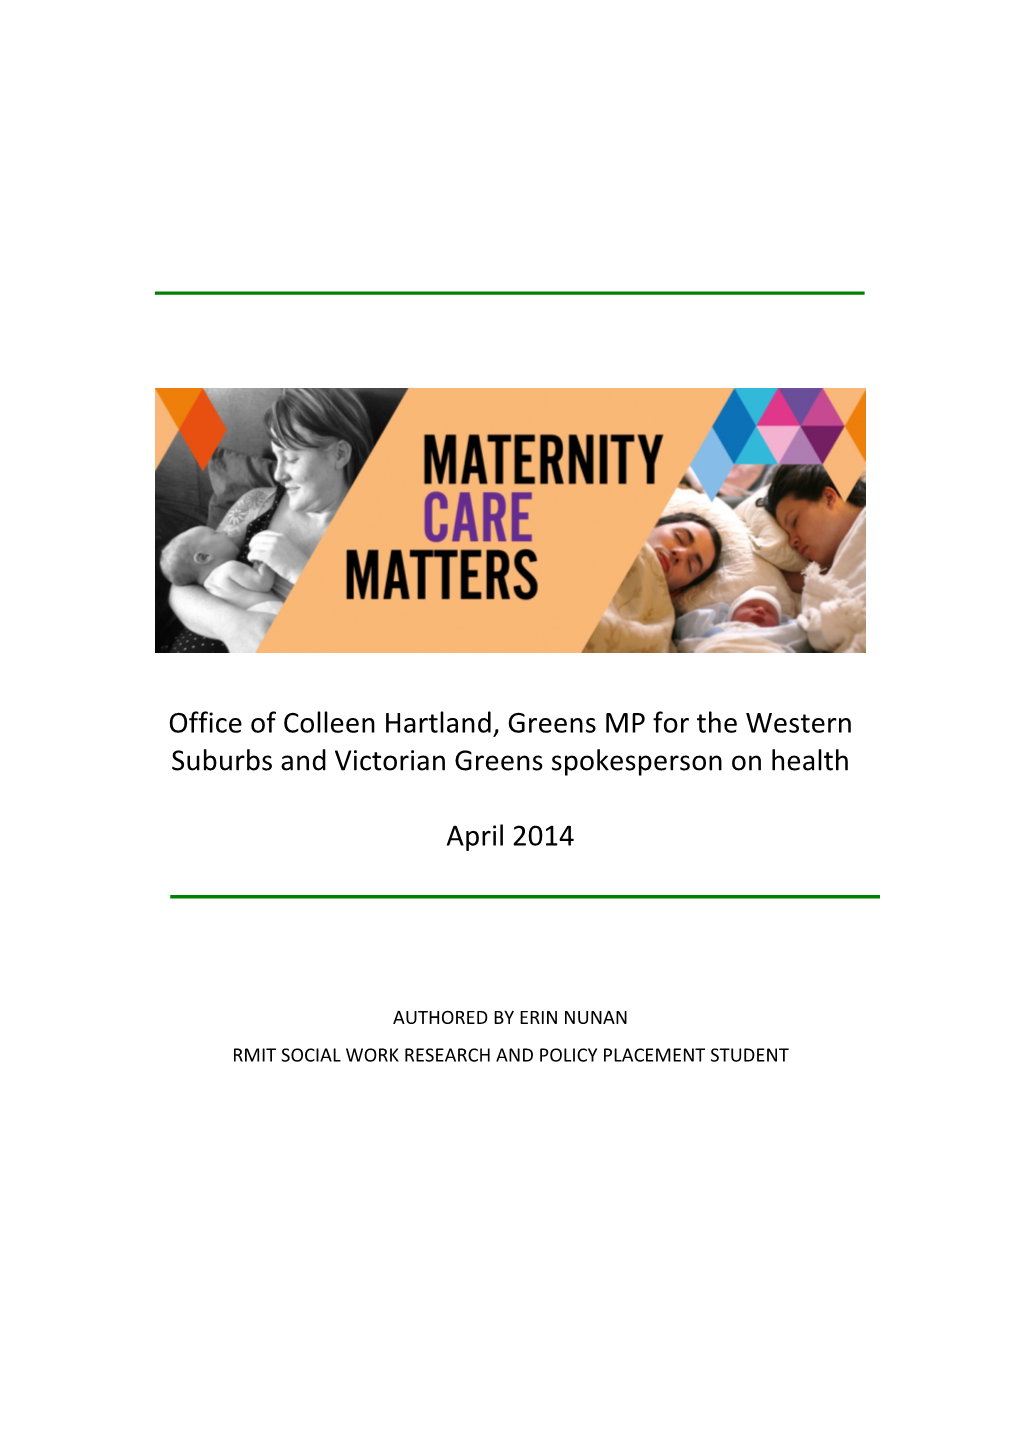 Office of Colleen Hartland, Greens MP for the Western Suburbs and Victorian Greens Spokesperson on Health